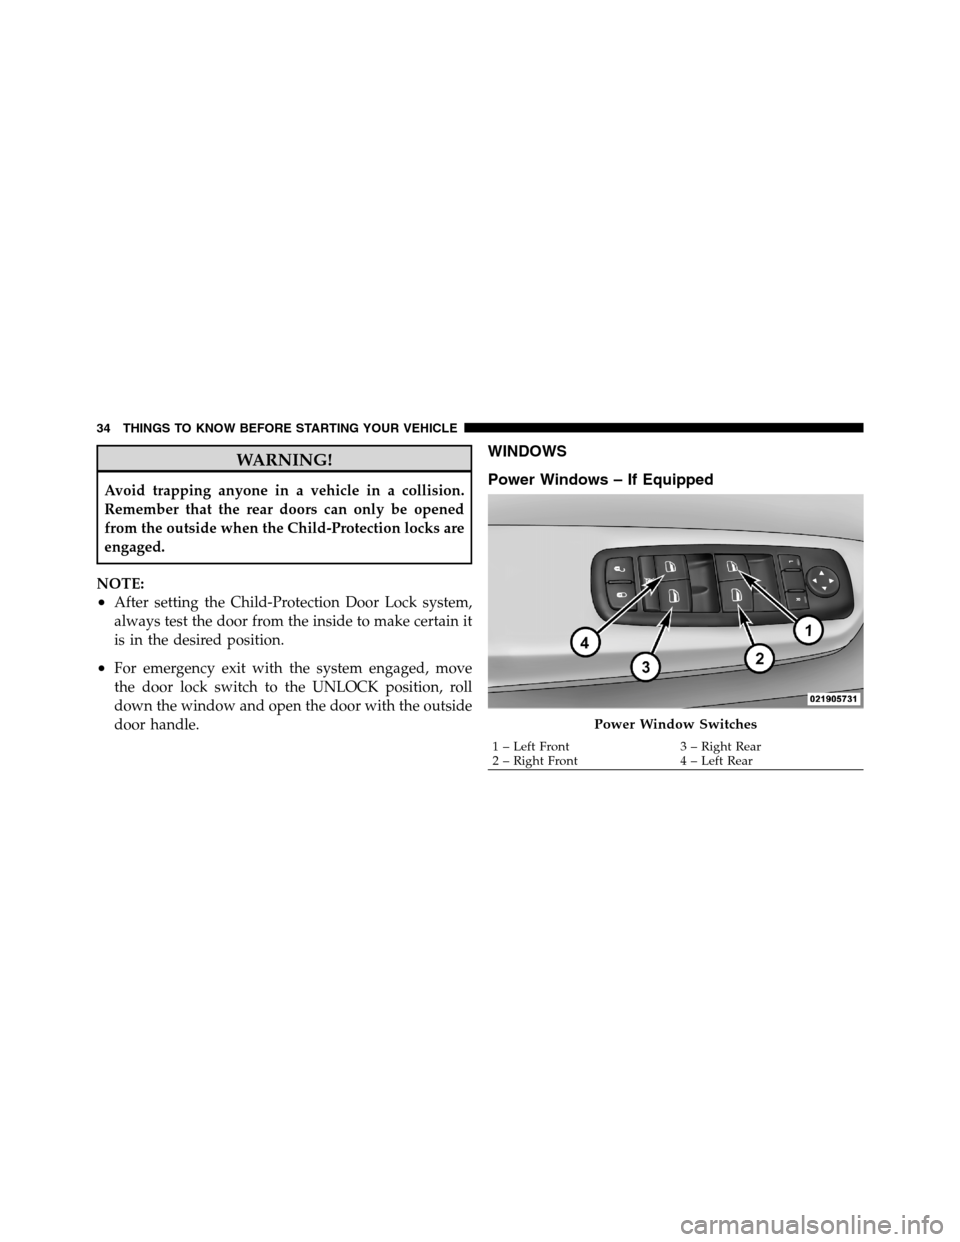 Ram 3500 2011 Owners Guide WARNING!
Avoid trapping anyone in a vehicle in a collision.
Remember that the rear doors can only be opened
from the outside when the Child-Protection locks are
engaged.
NOTE:
•After setting the Chi